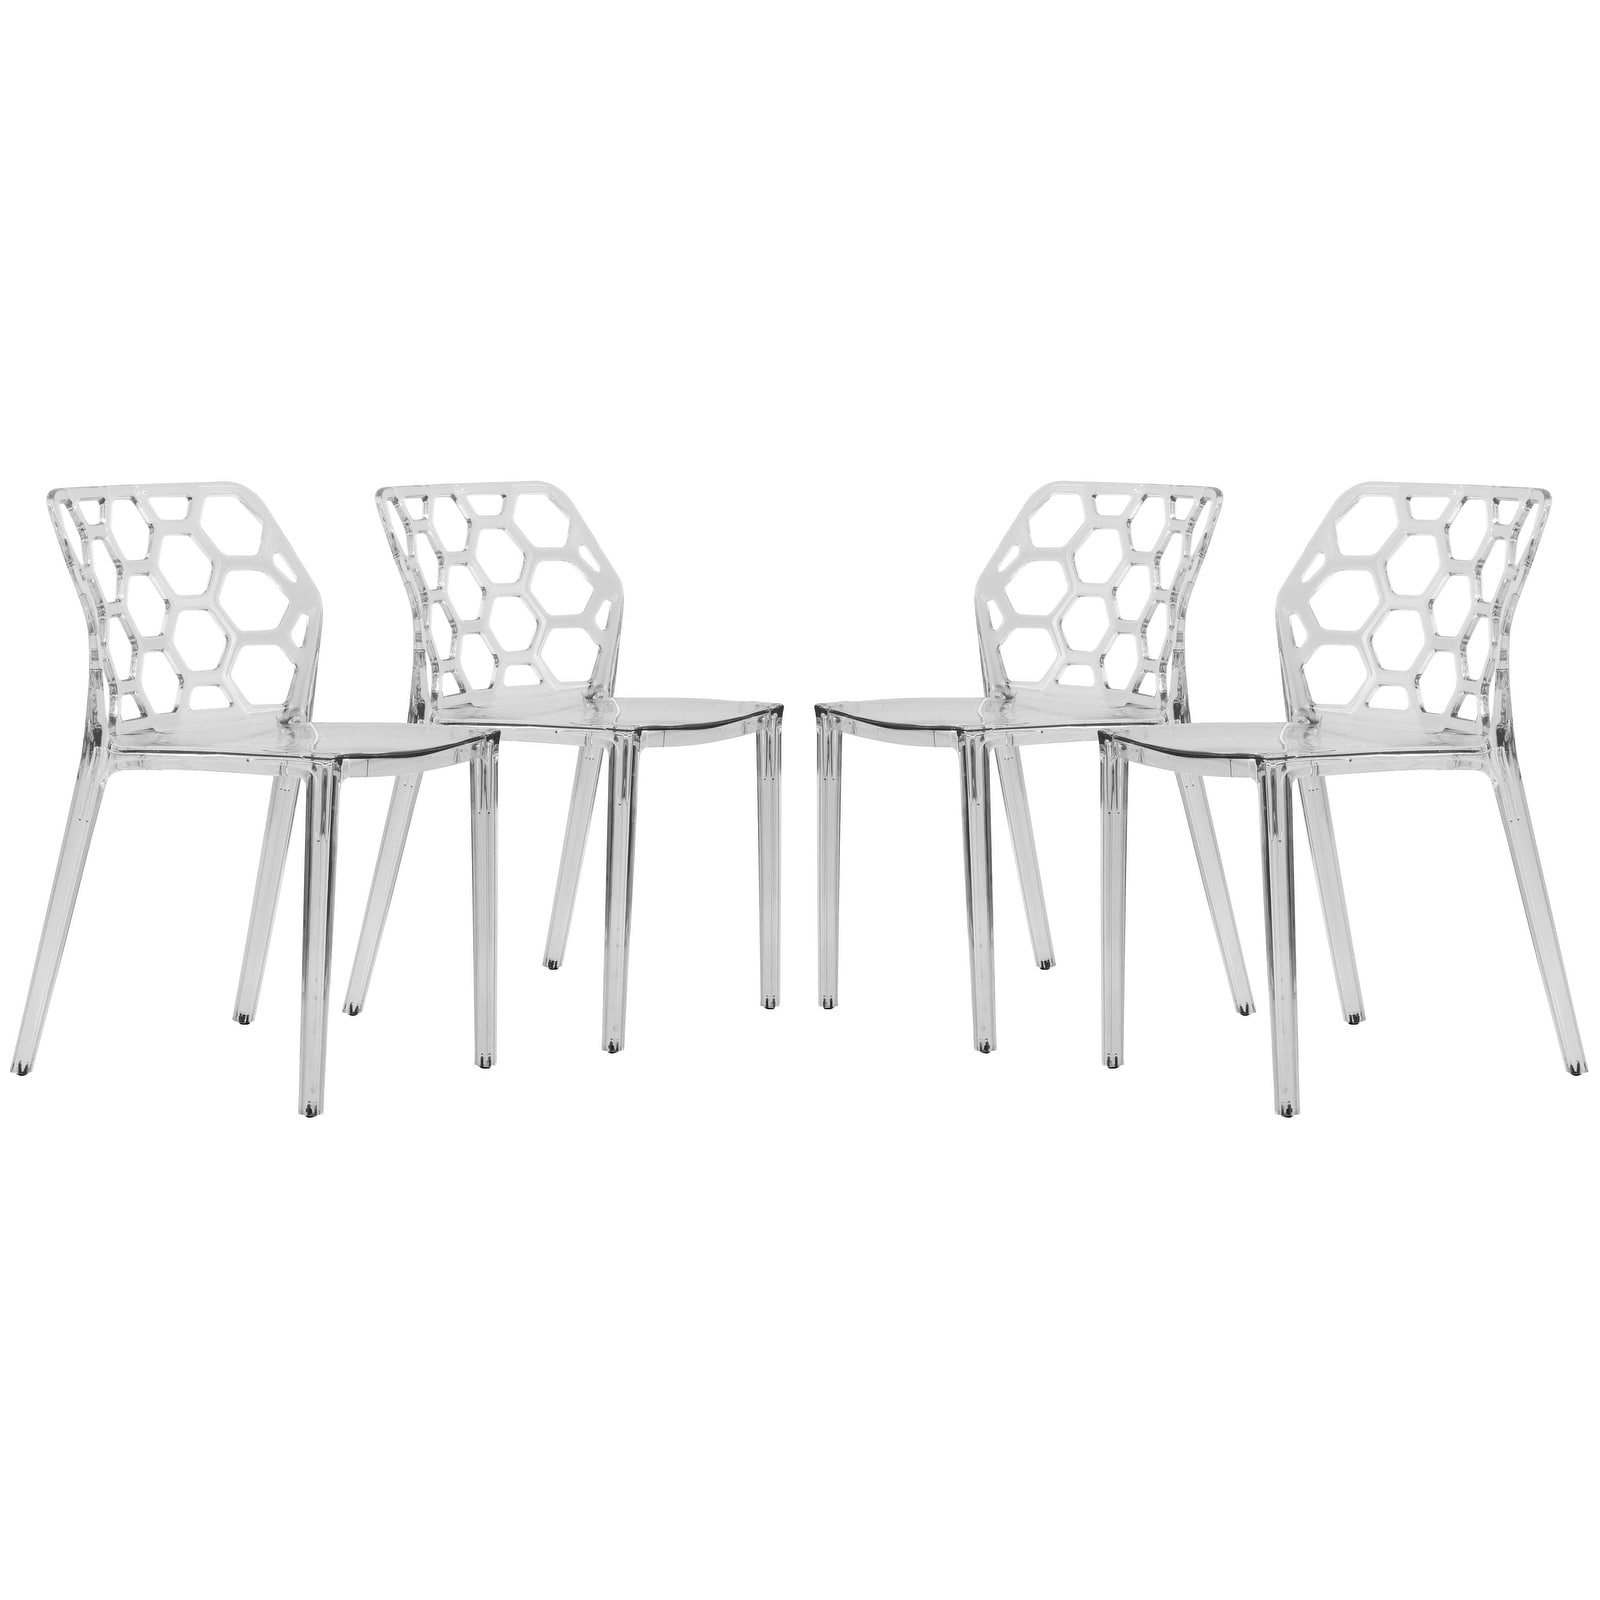 Cove Transparent Black Acrylic Modern Dining Chair (set Of 4)